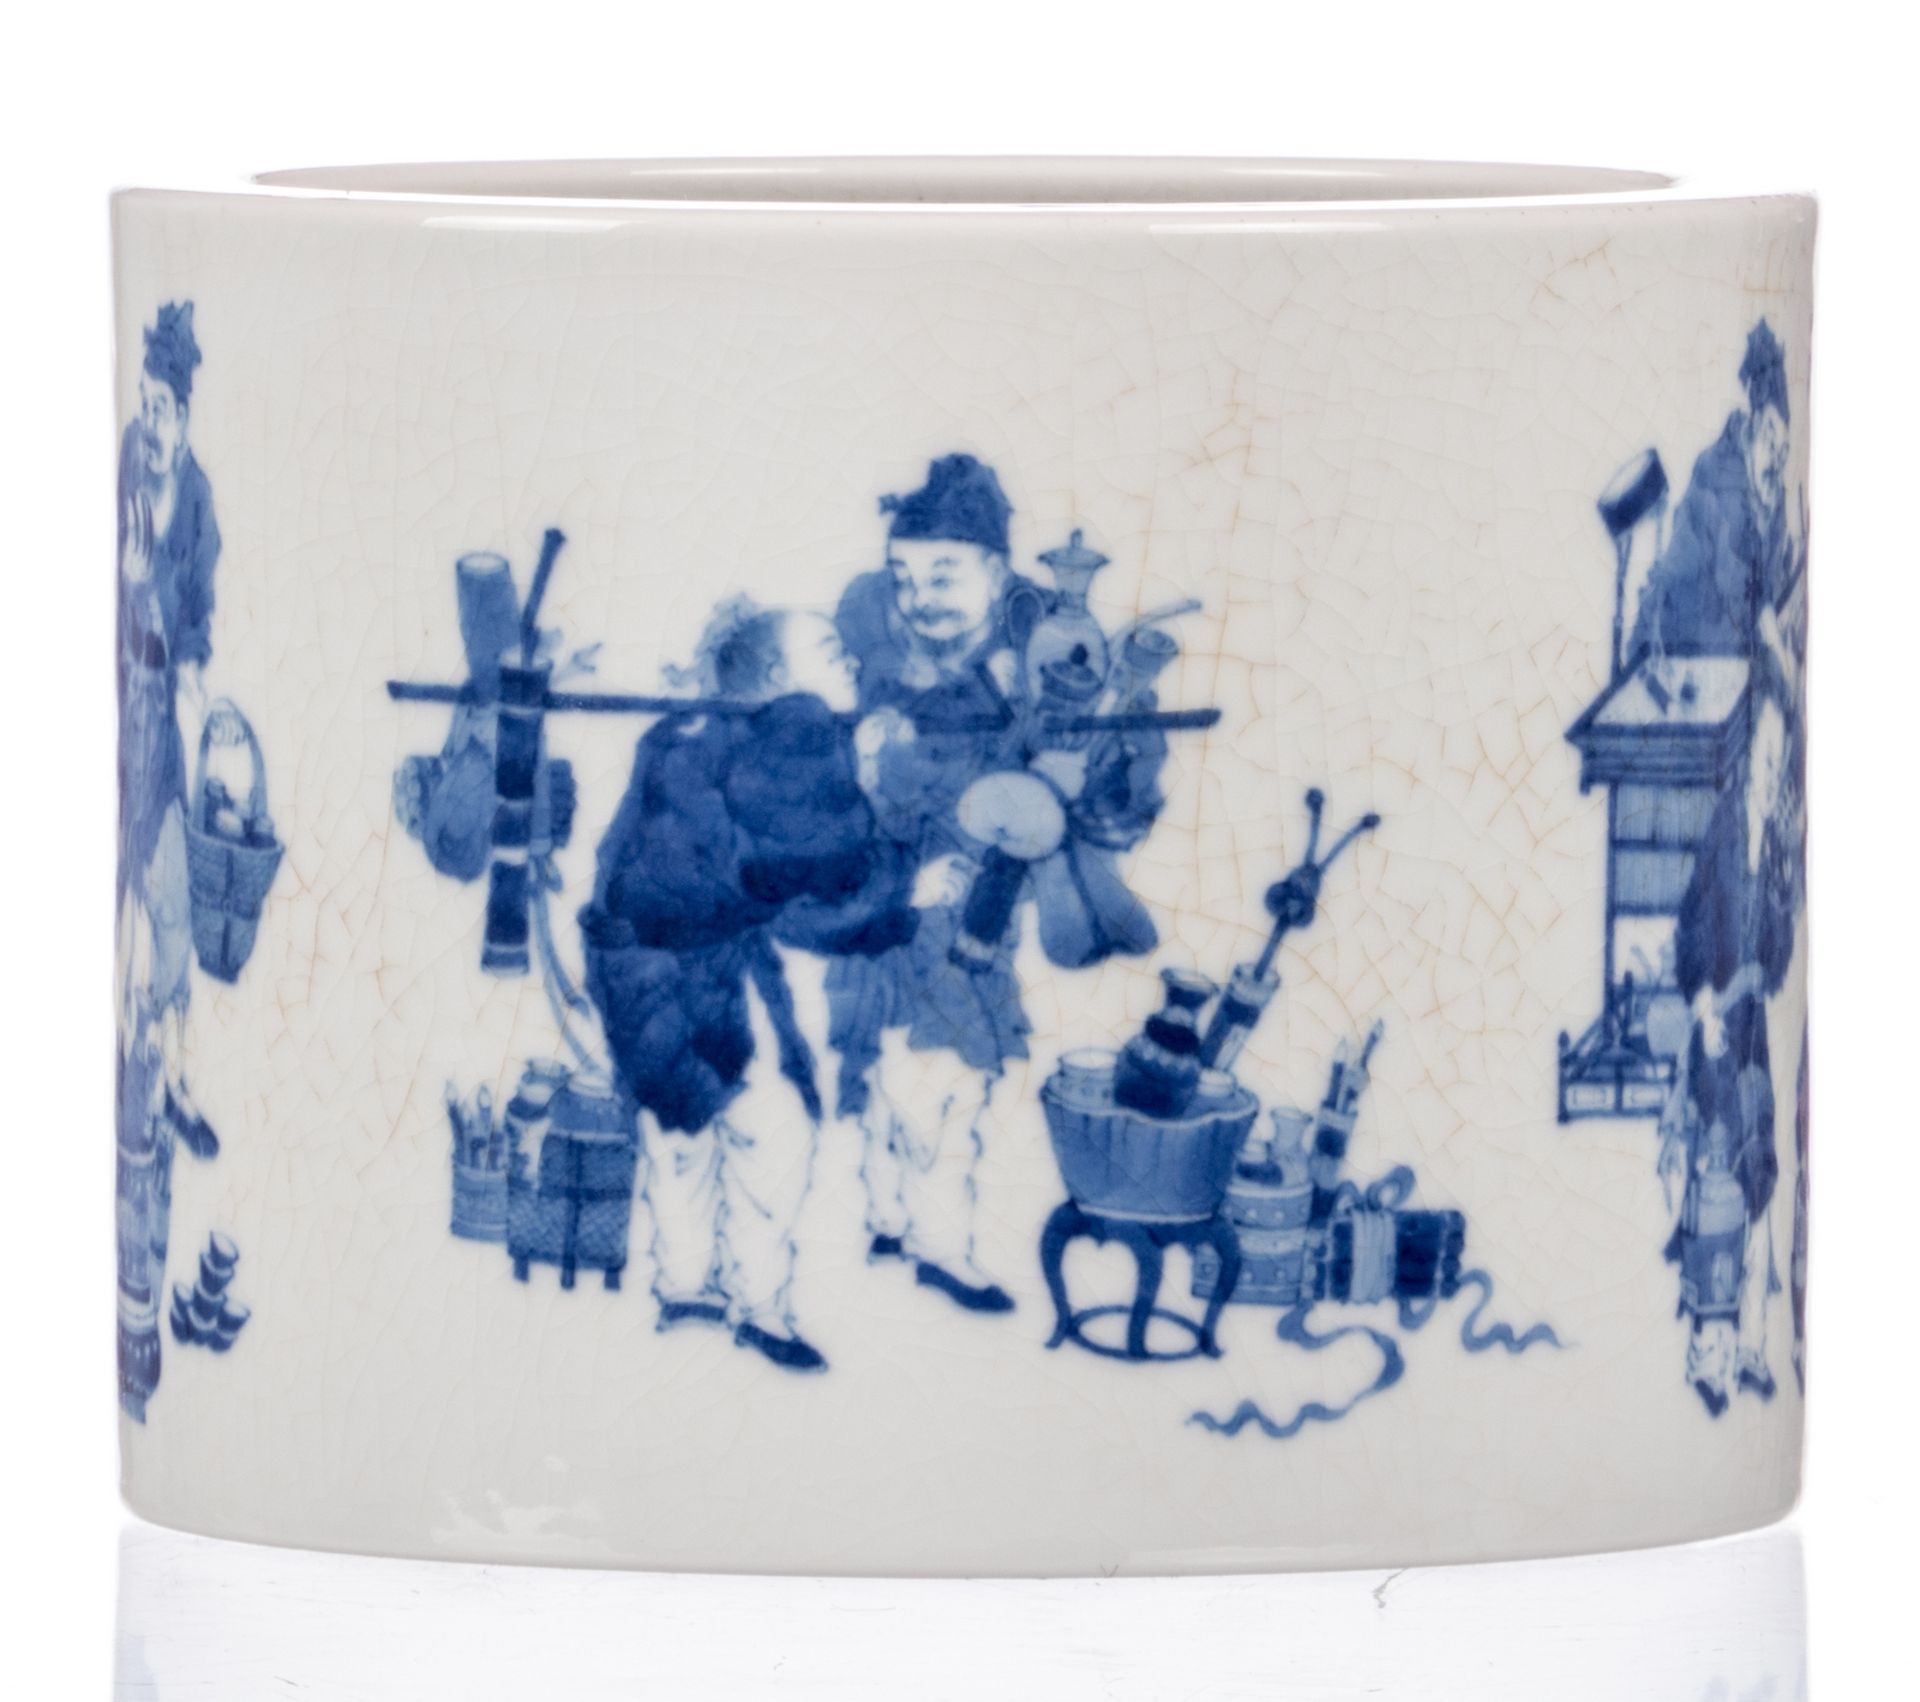 A Chinese blue and white brushpot, decorated with animated scenes, marked, 20thC, H 15 - Diameter 20 - Image 5 of 8